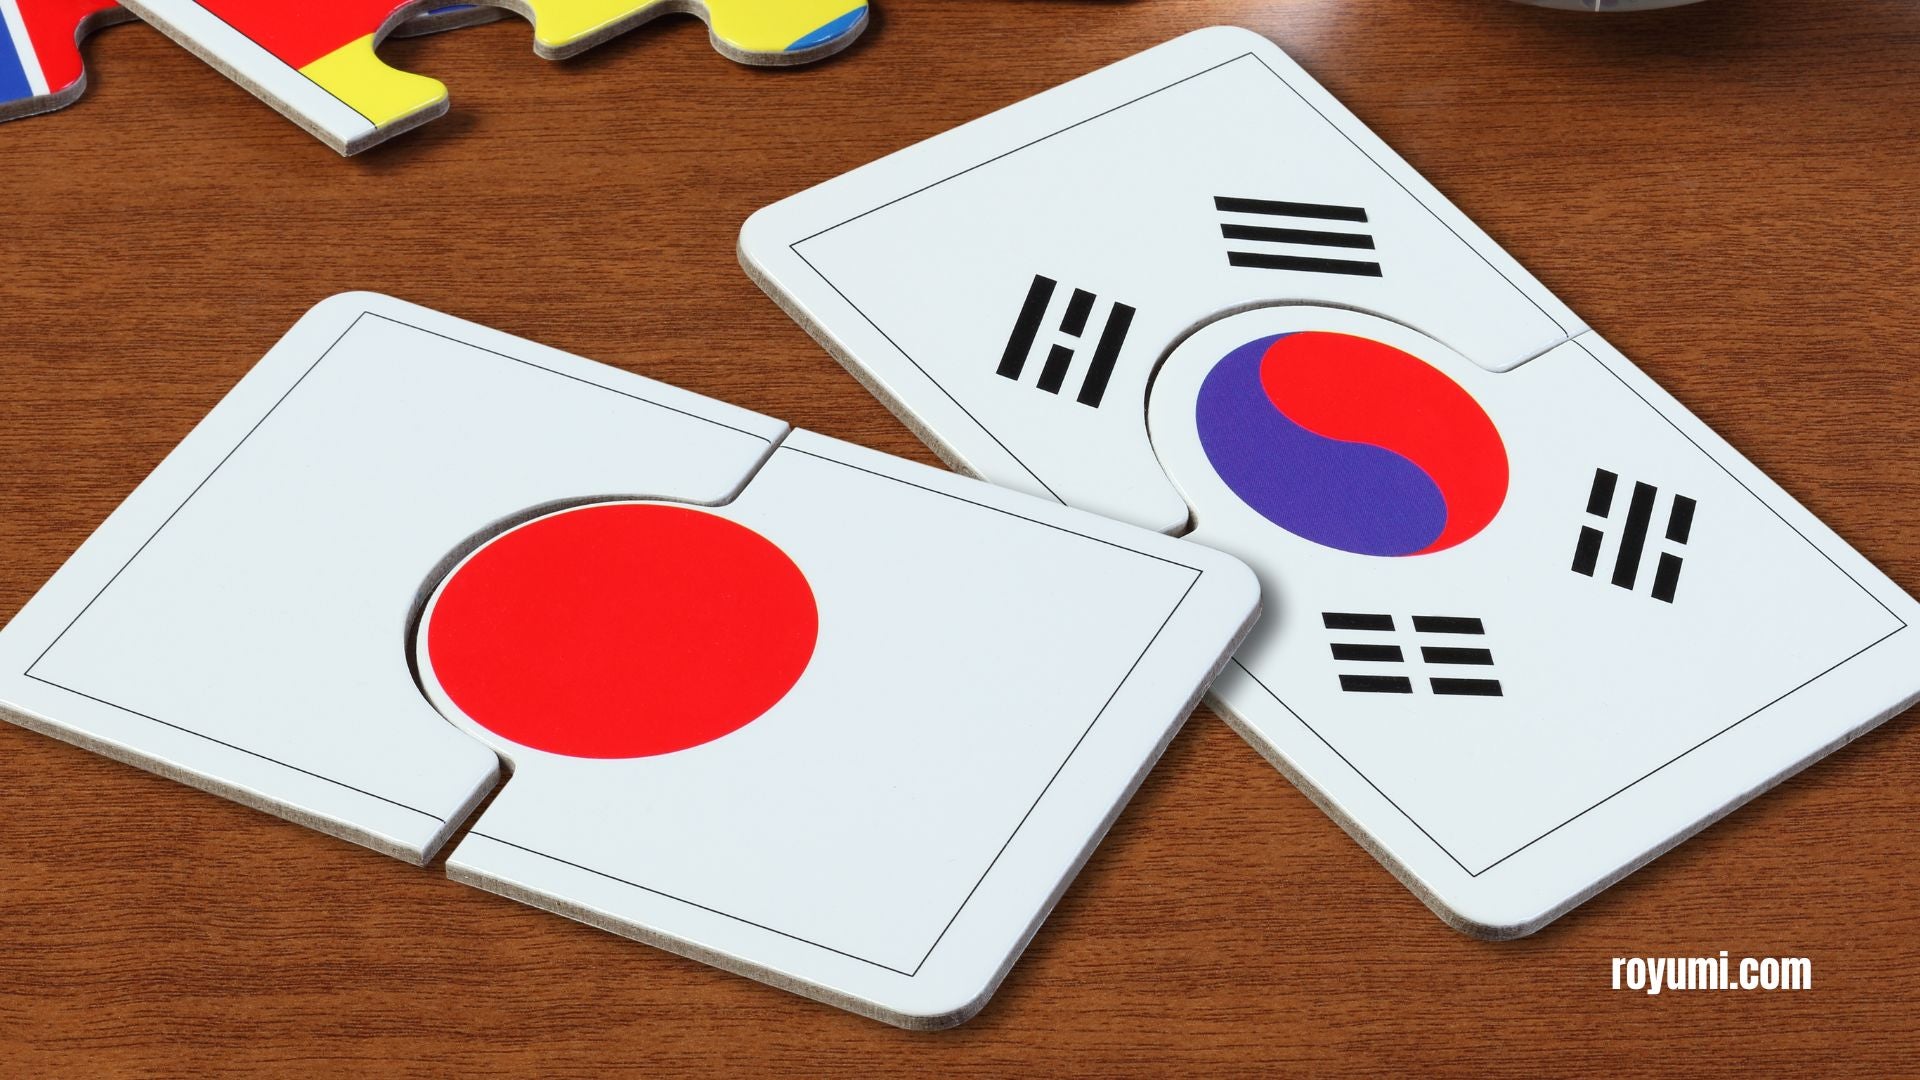 The Role of Japan in the Promotion and Preservation of Hangul in Korea